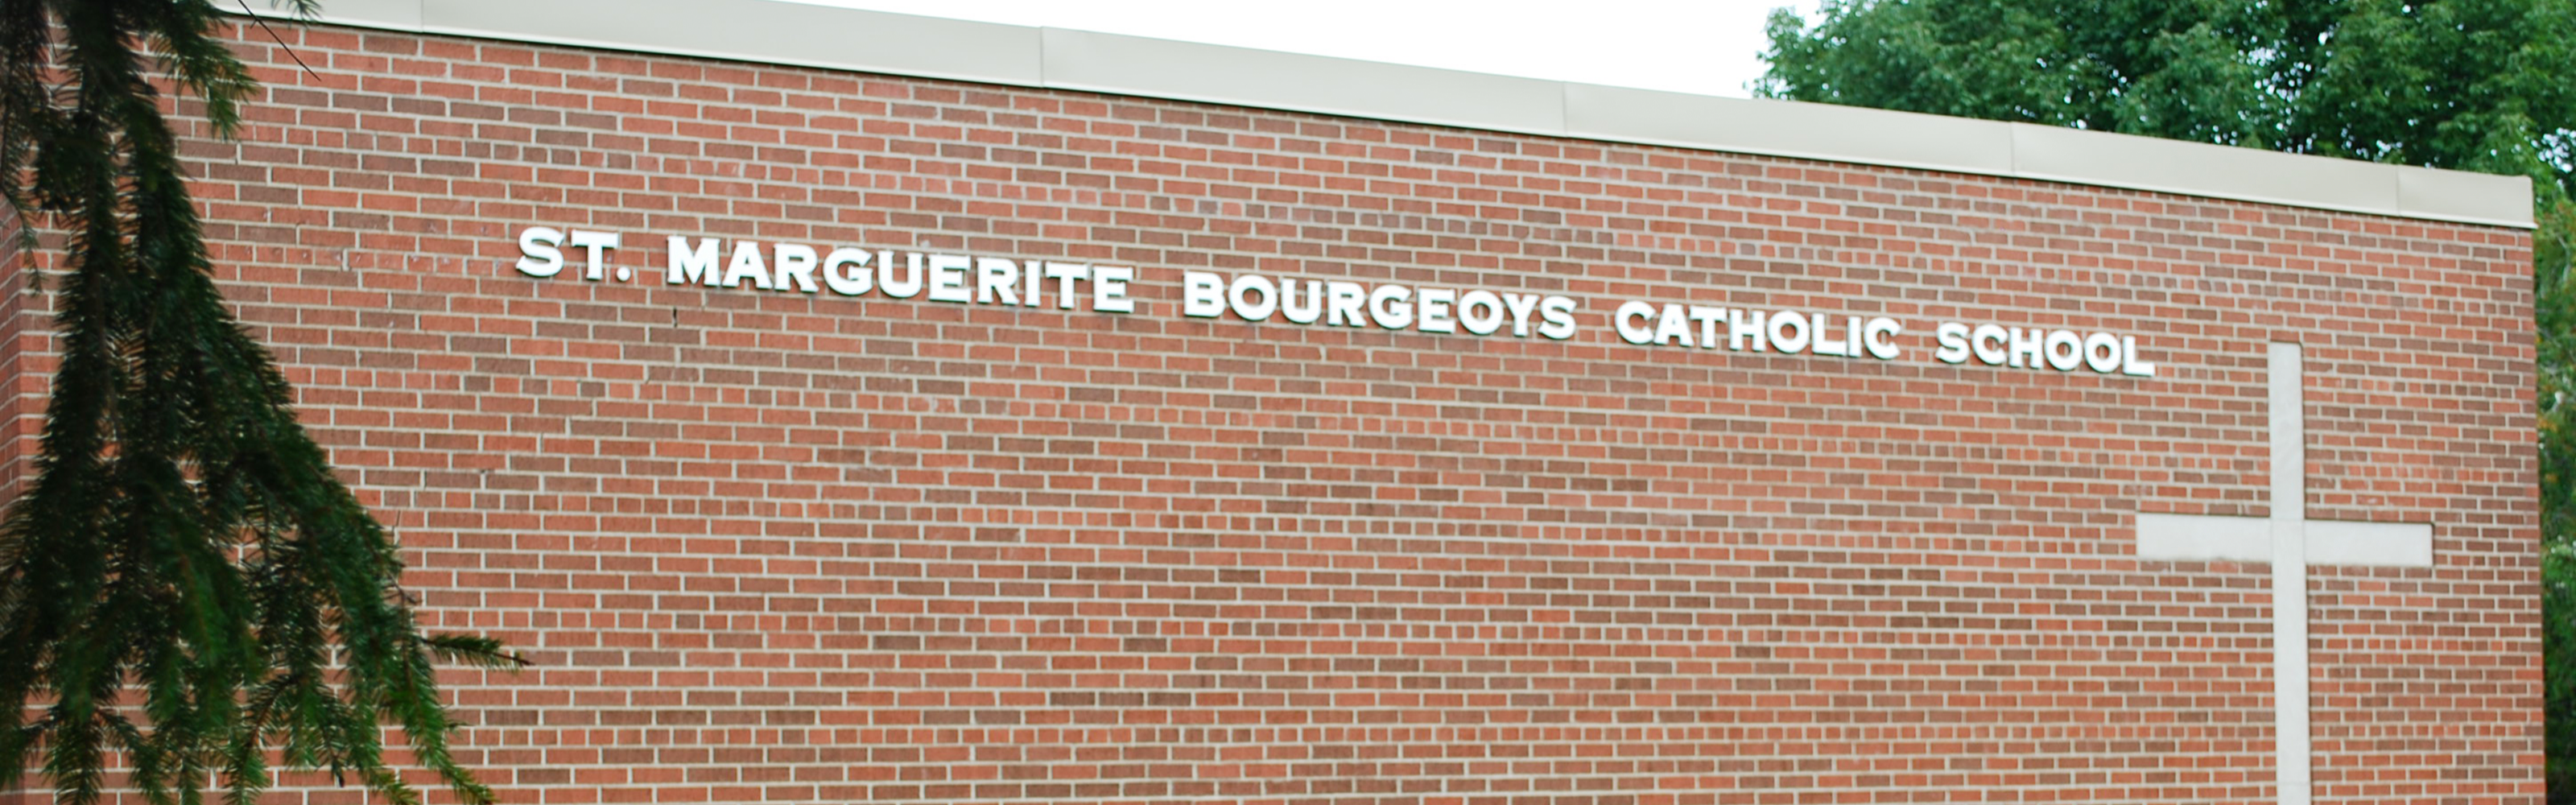 The front of the St. Marguerite Bourgeoys Catholic School building.